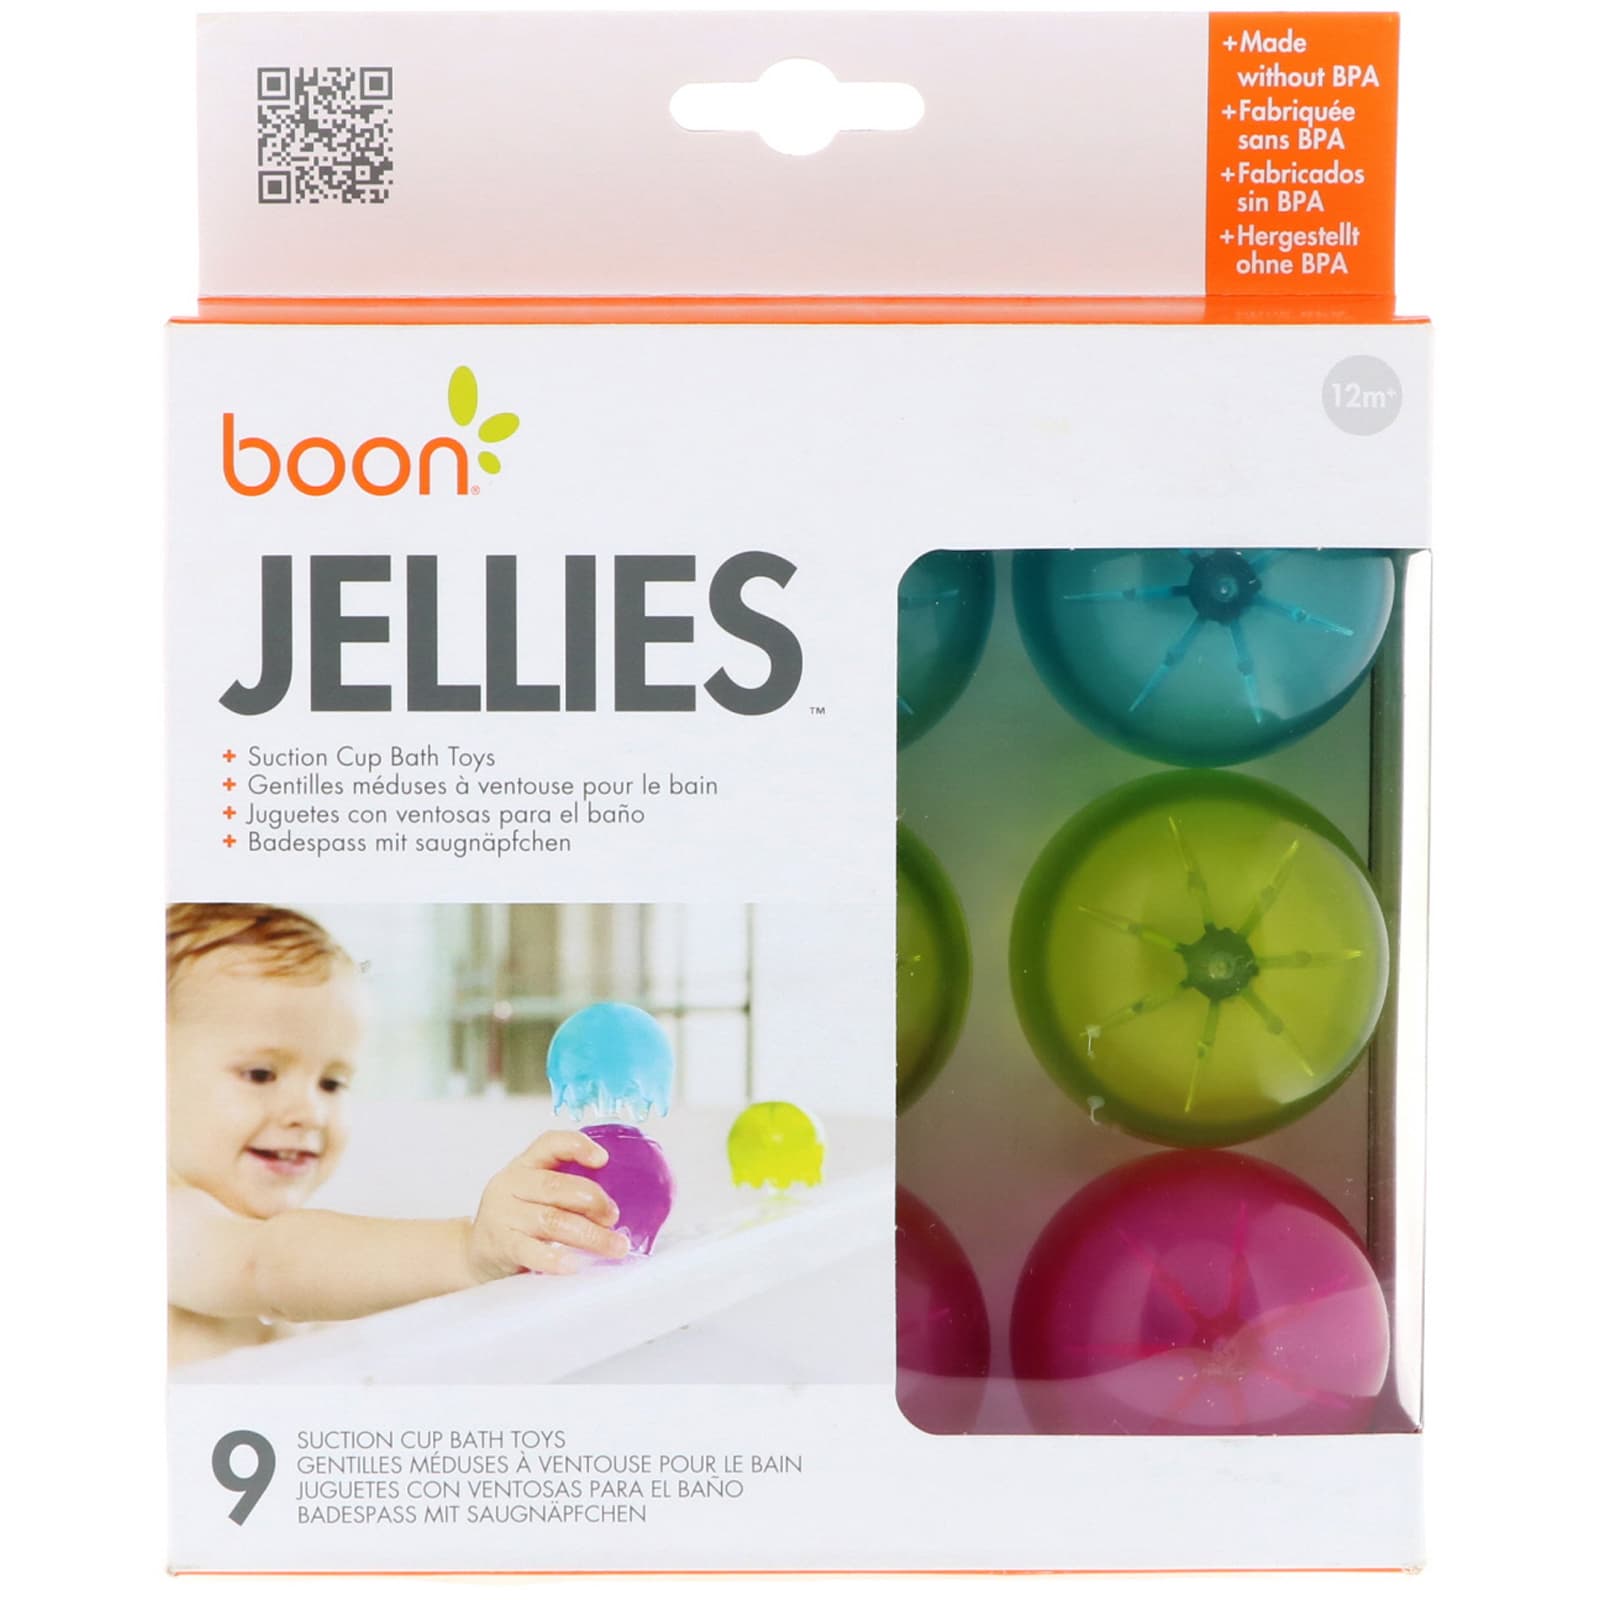 NEW Boon JELLIES SUCTION CUP BATH TOYS Baby Bath Toy